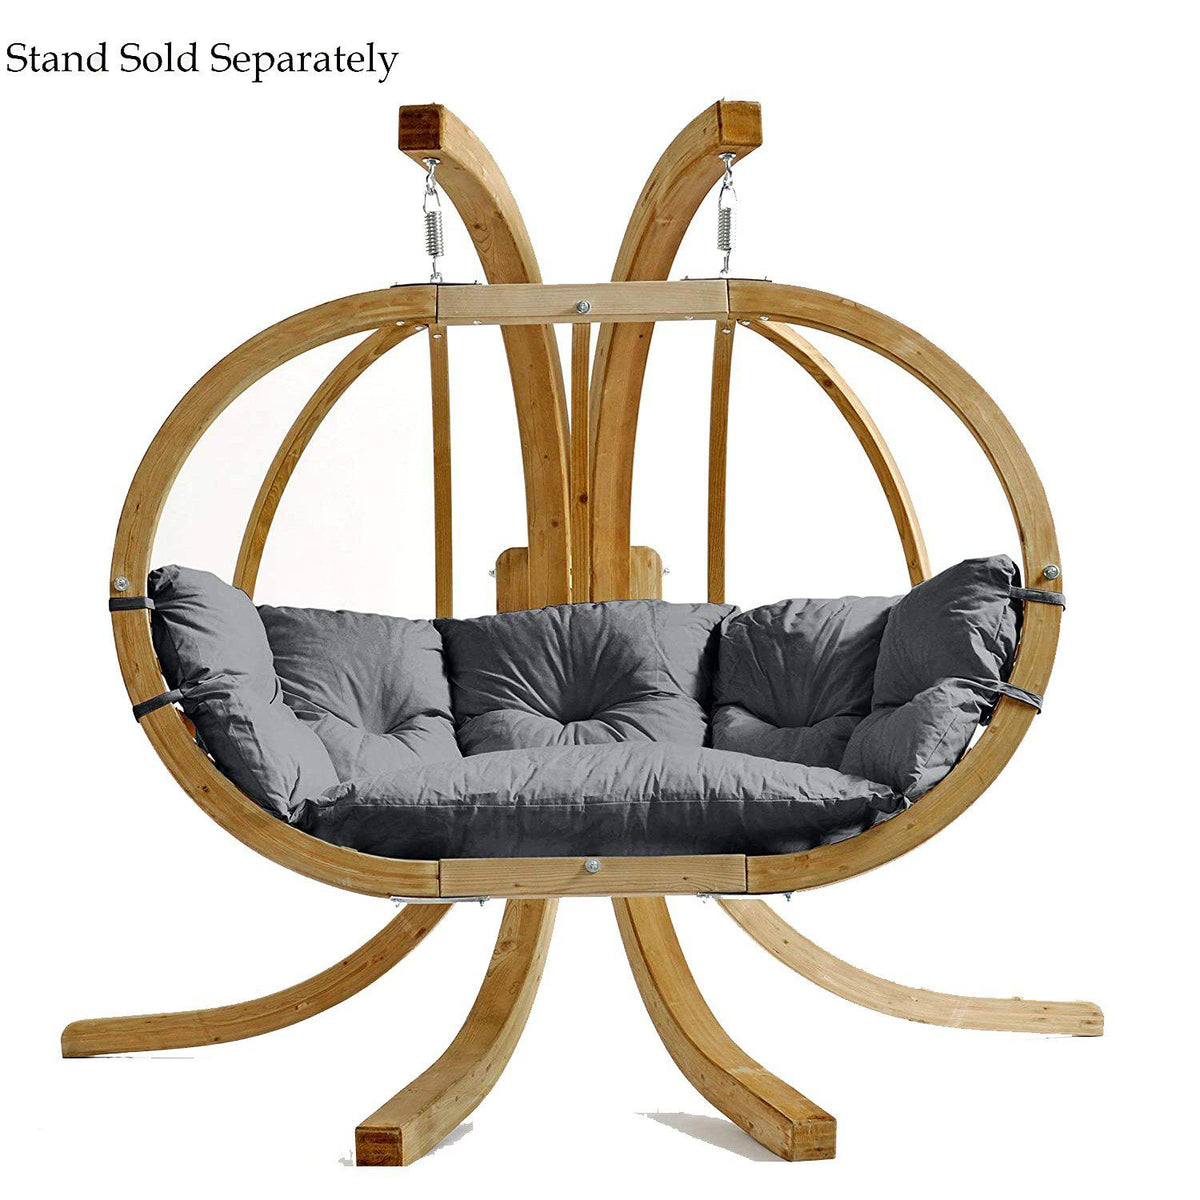 Globo Royal Chair, from Byer of Maine